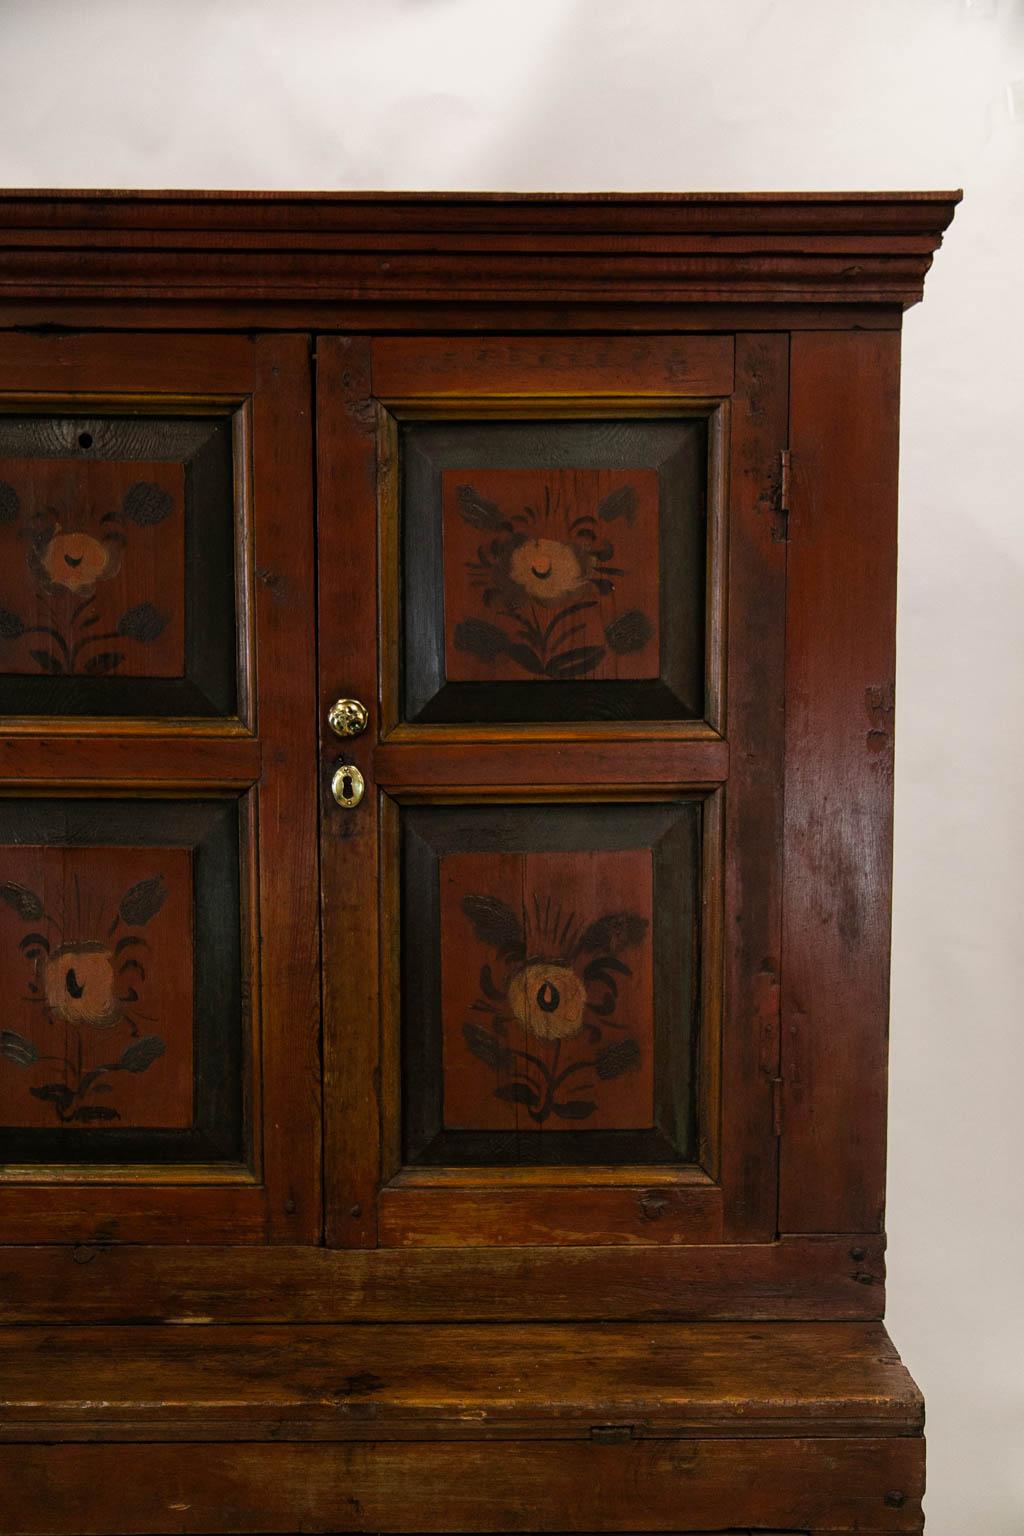 This cupboard has exposed peg construction throughout. The doors and central sections have raised panels framed with shaped moldings. The floral paintings are original. The shelves are fixed in the top and bottom.